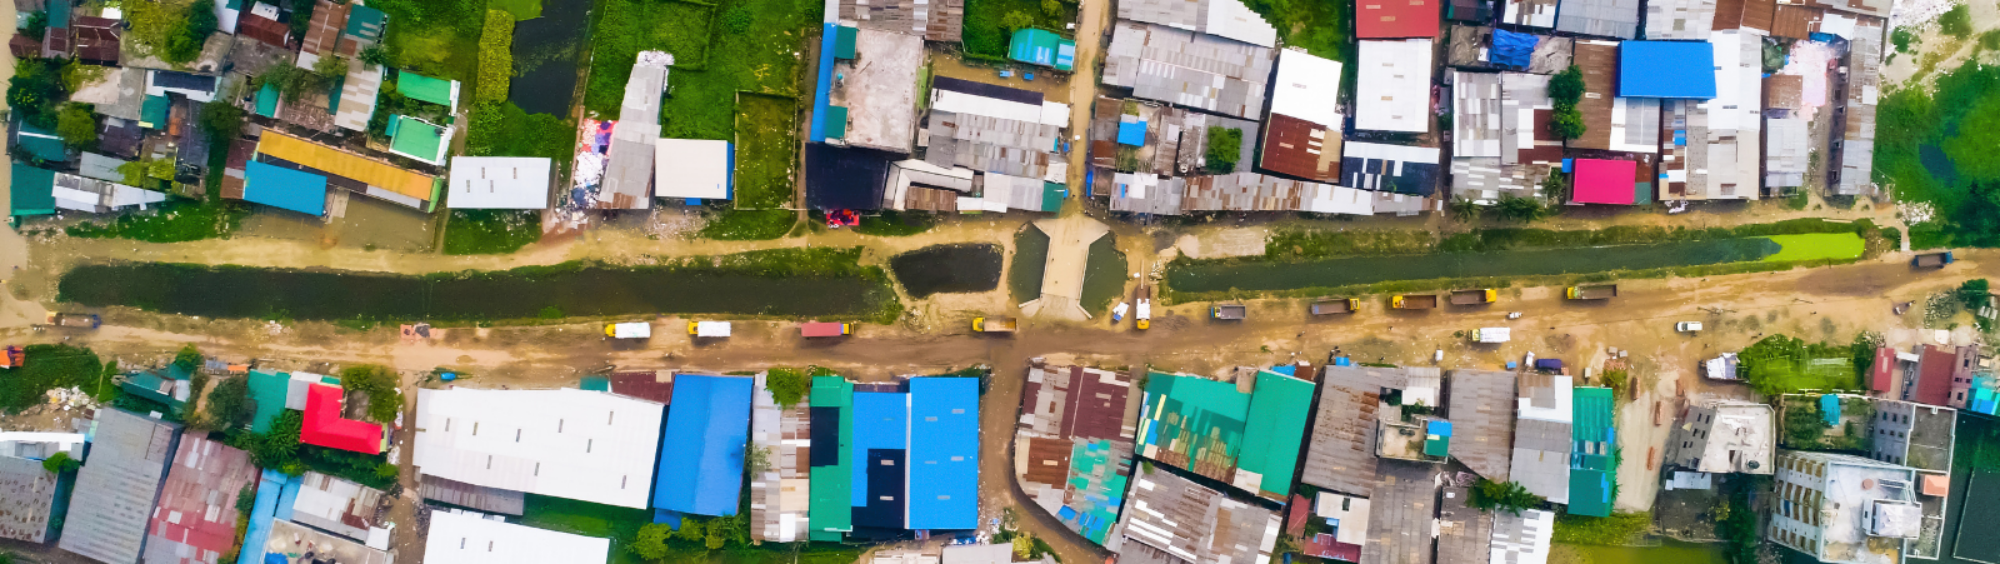 An aerial view of a slum in Bangladesh. The camera is looking down on a series of about 50 dwellings, all different colours, many with corrugated iron roofs.